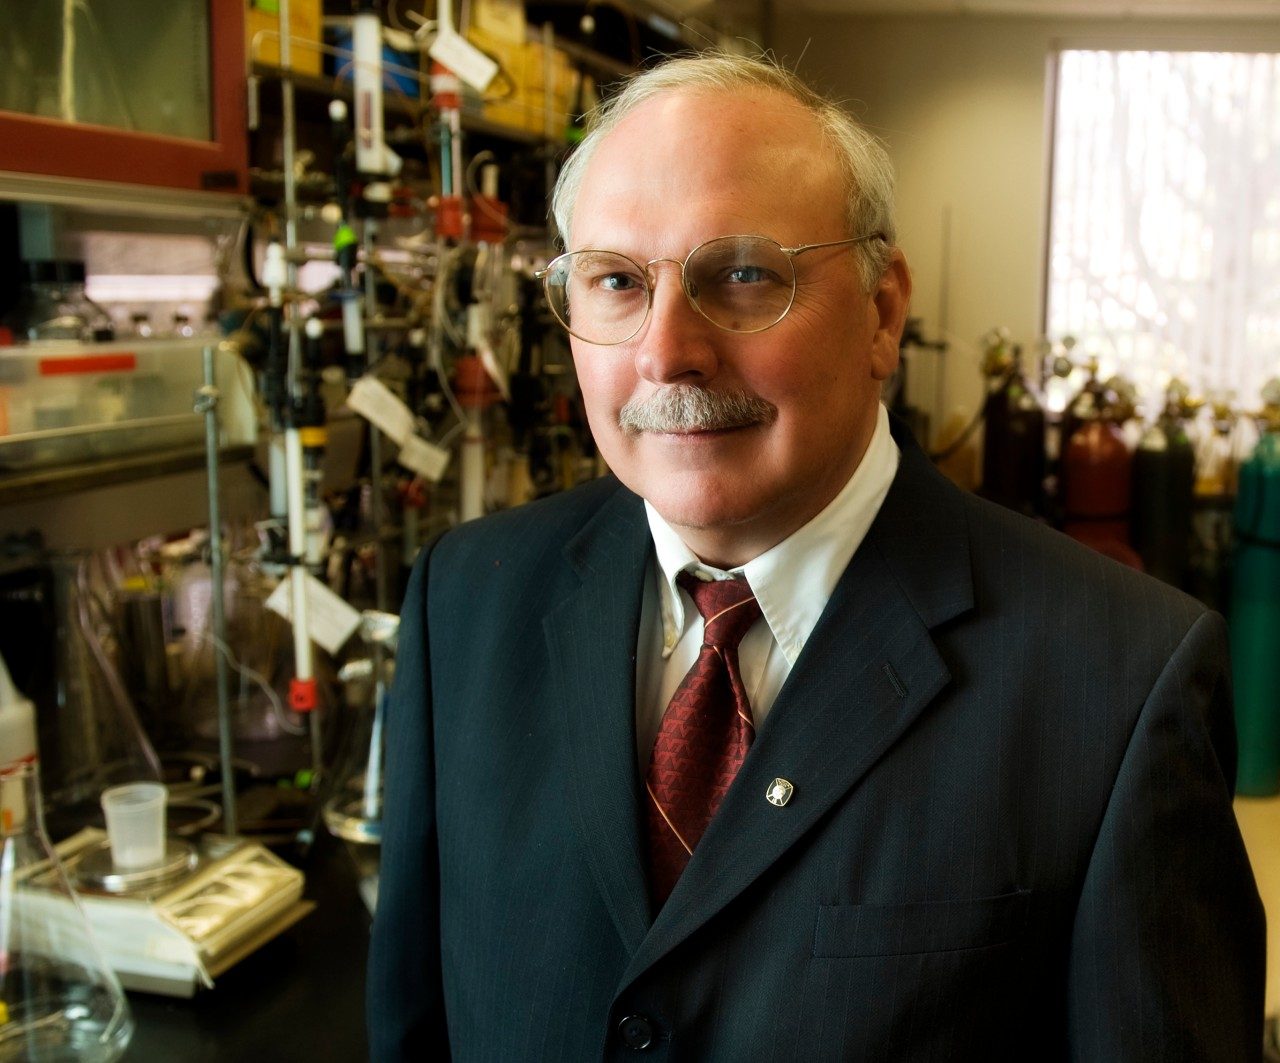 Dennis Dean is a University Distinguished Professor at Virginia Tech and director of the Fralin Life Science Institute